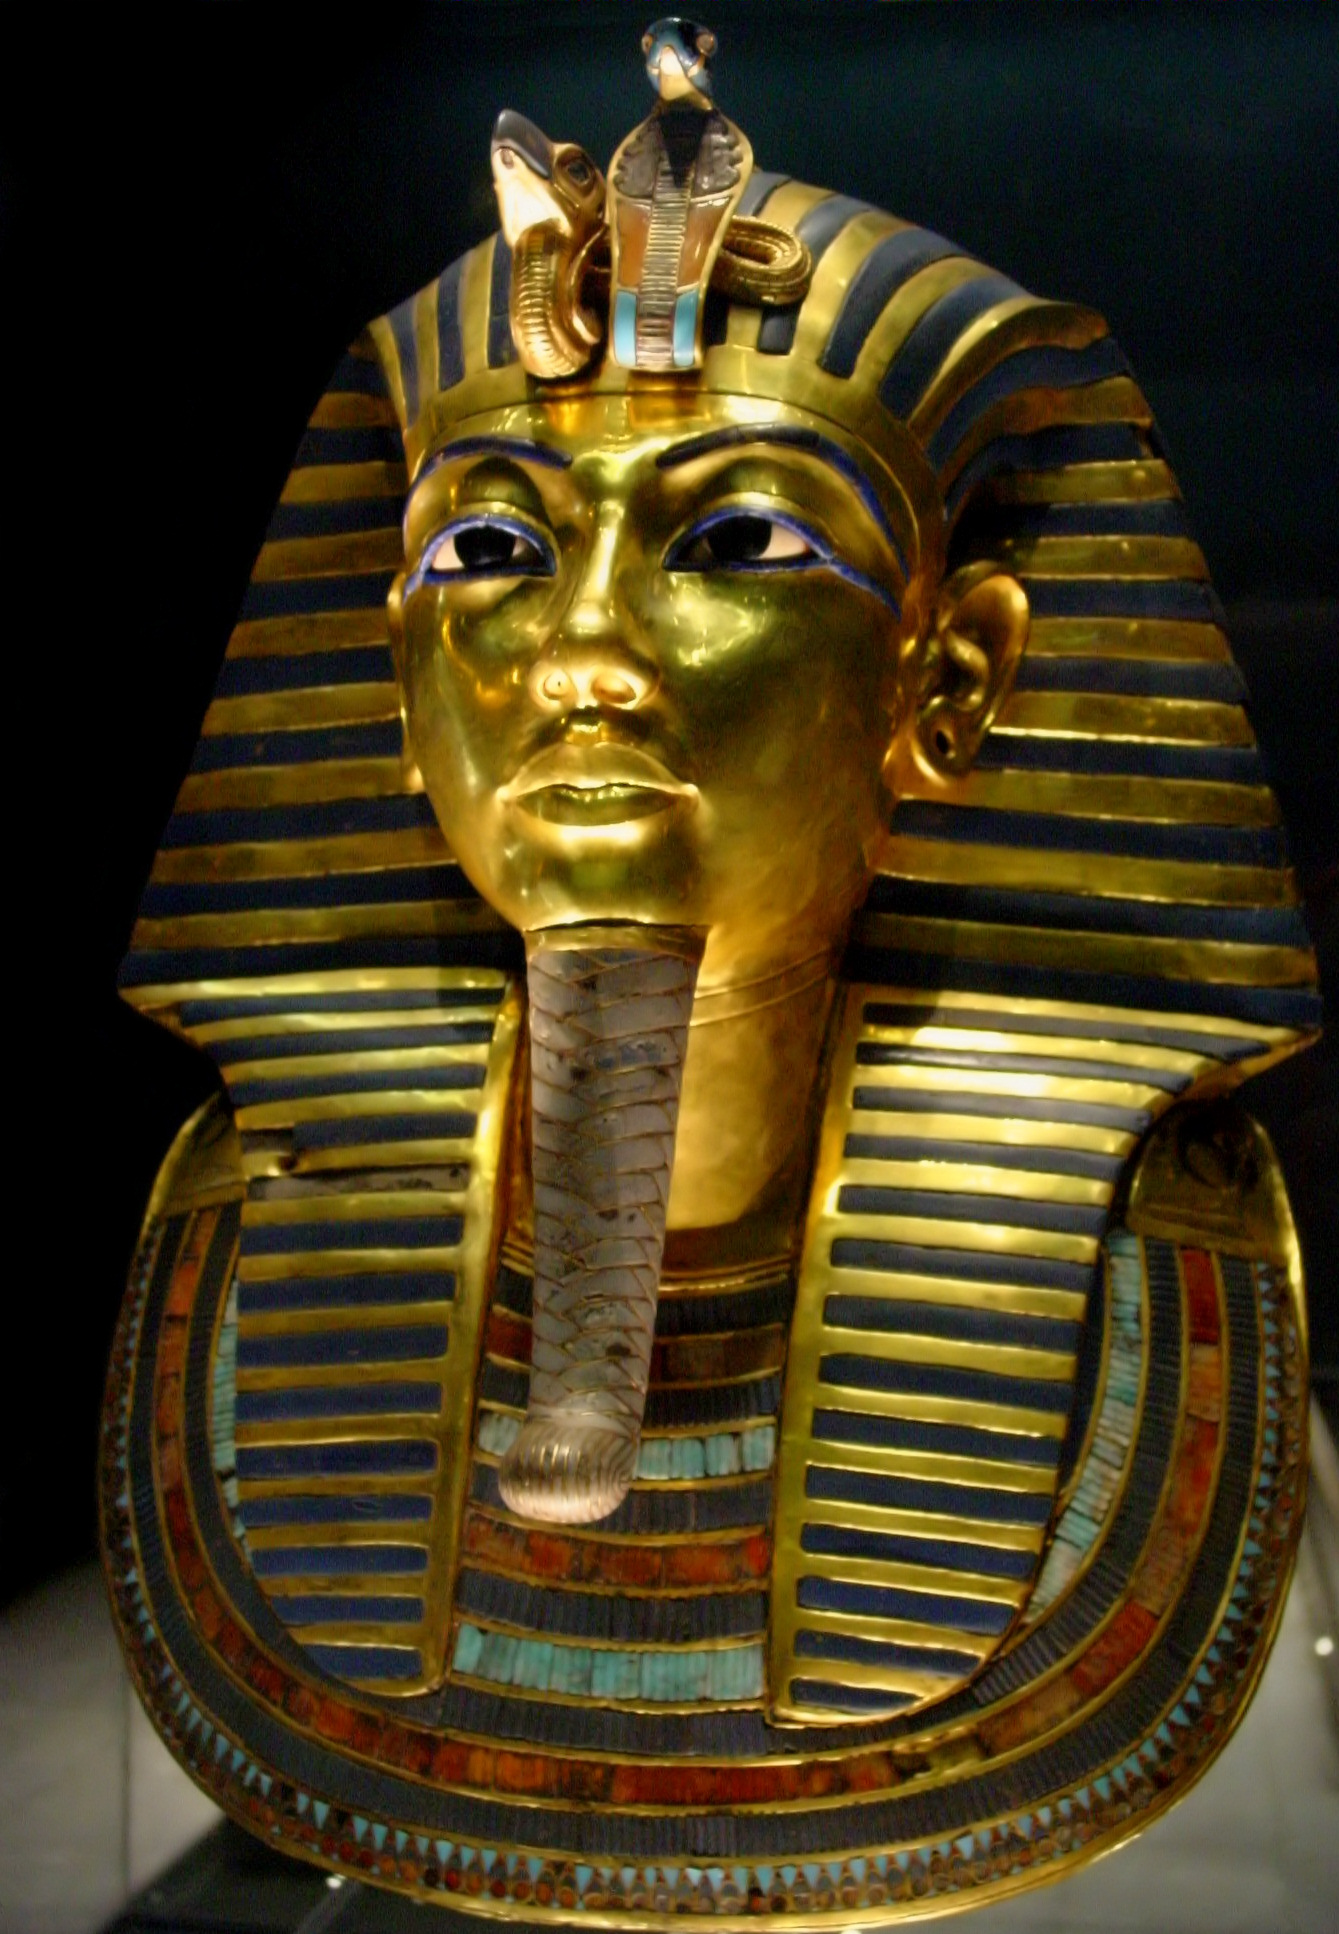 Tuthankamen's famous burial mask, on display in the Egyptian Museum in Cairo.